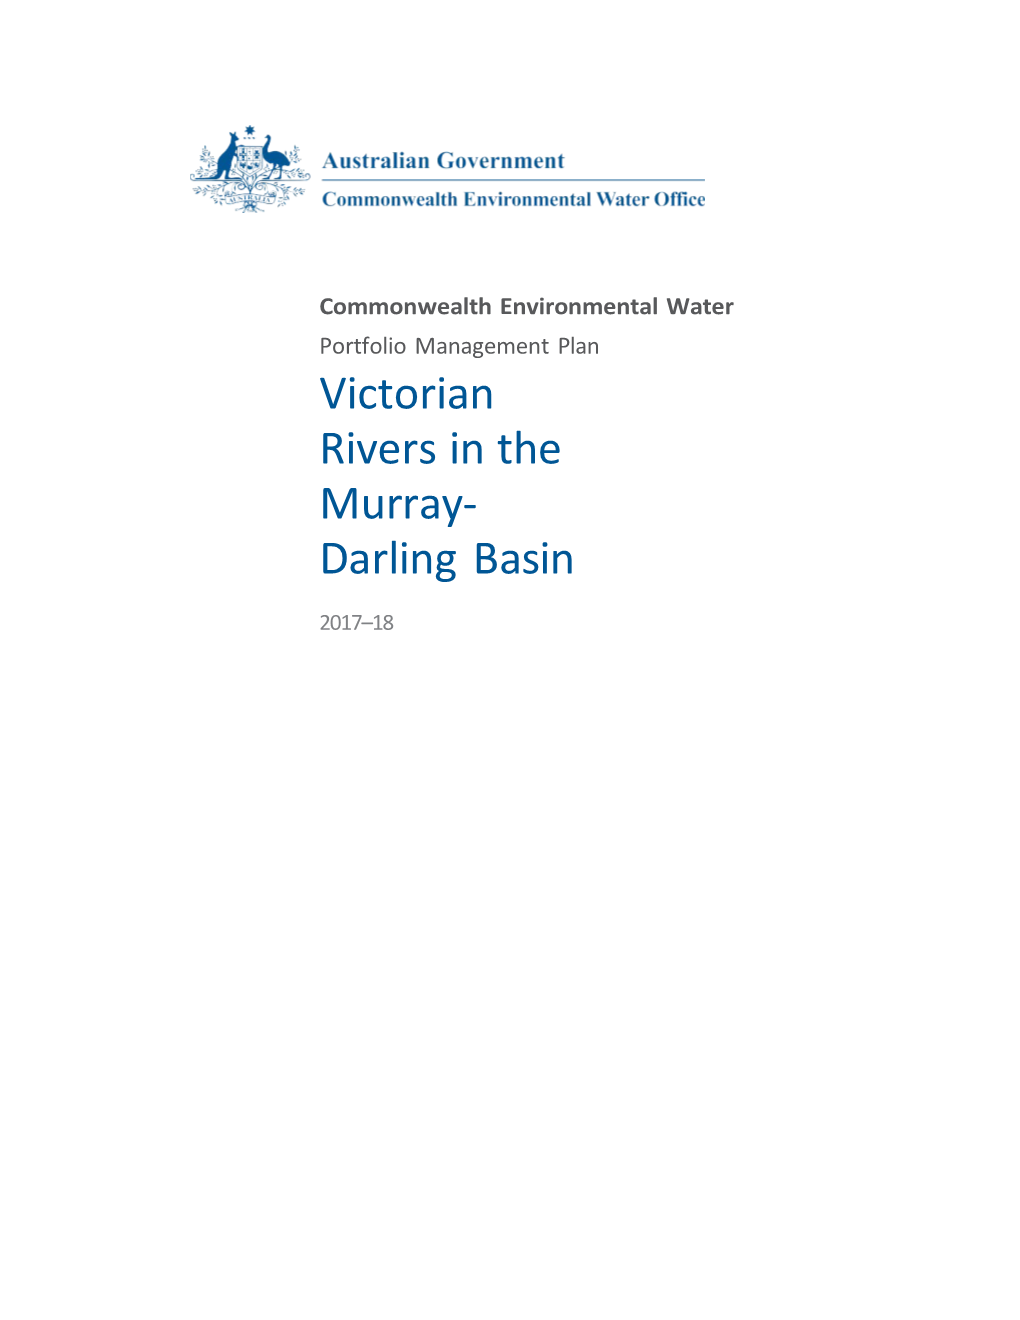 Portfolio Management Plan Victorian Rivers in the Murray-Darling Basin 2017 18